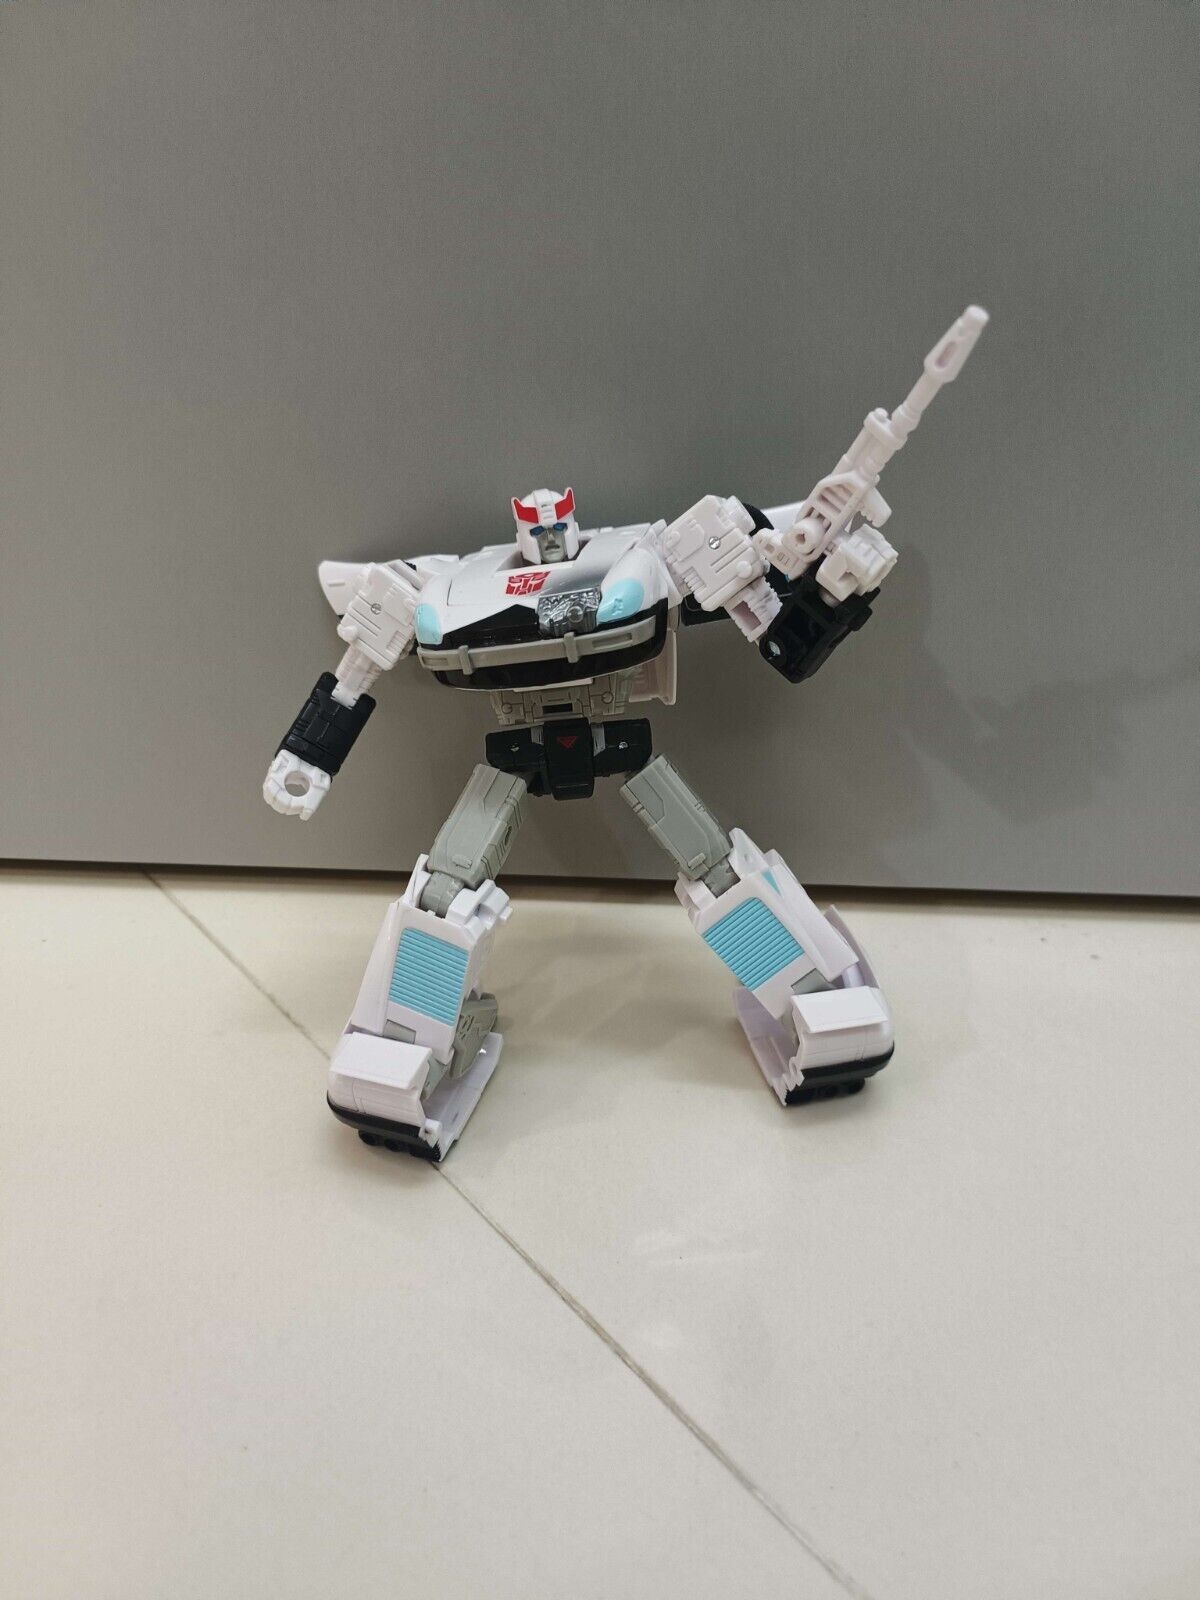 Transformers News: First Look at Studio Series 86 "Dead" Prowl from the Buzzworthy Bumblebee line